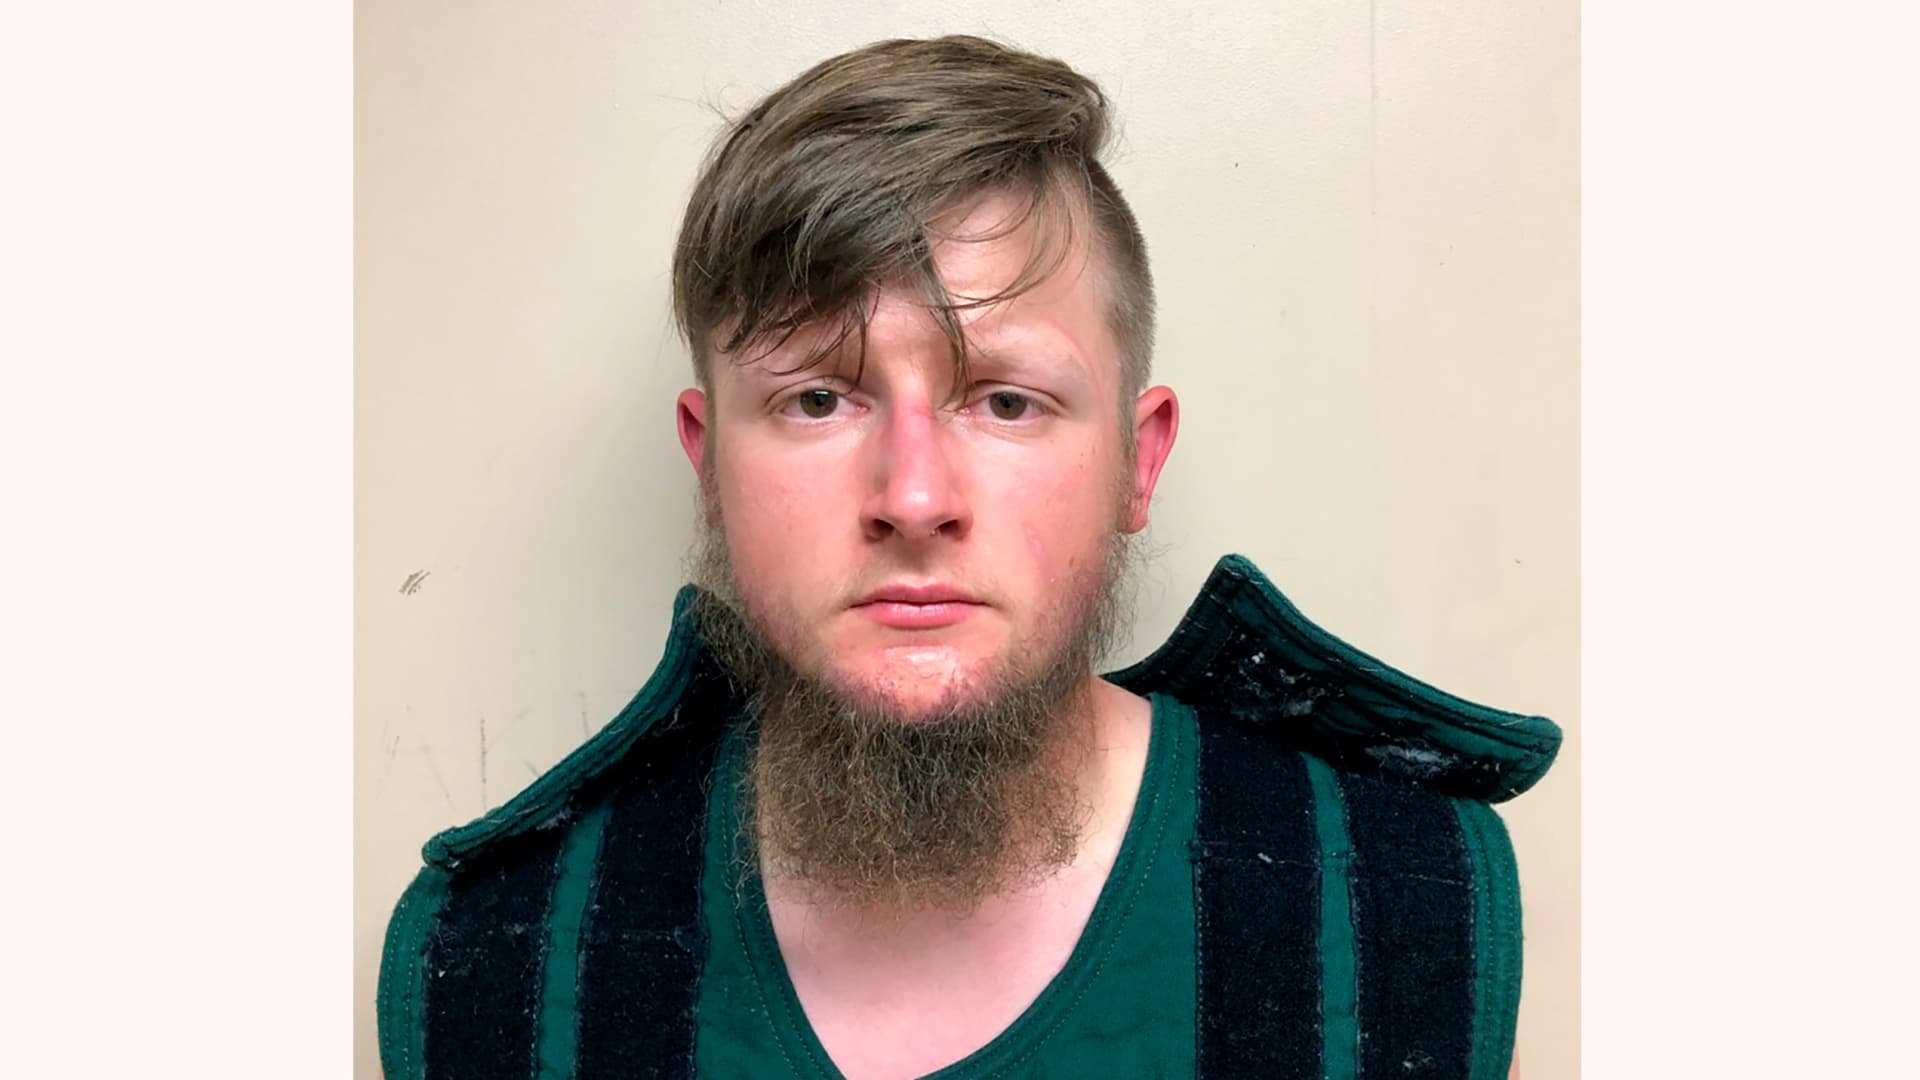 This booking photo provided by the Crisp County Sheriff's Office shows Robert Aaron Long on Tuesday, March 16, 2021. Long was arrested as a suspect in the fatal shootings of multiple people at three Atlanta-area massage parlors, most of them women of Asian descent, authorities said.